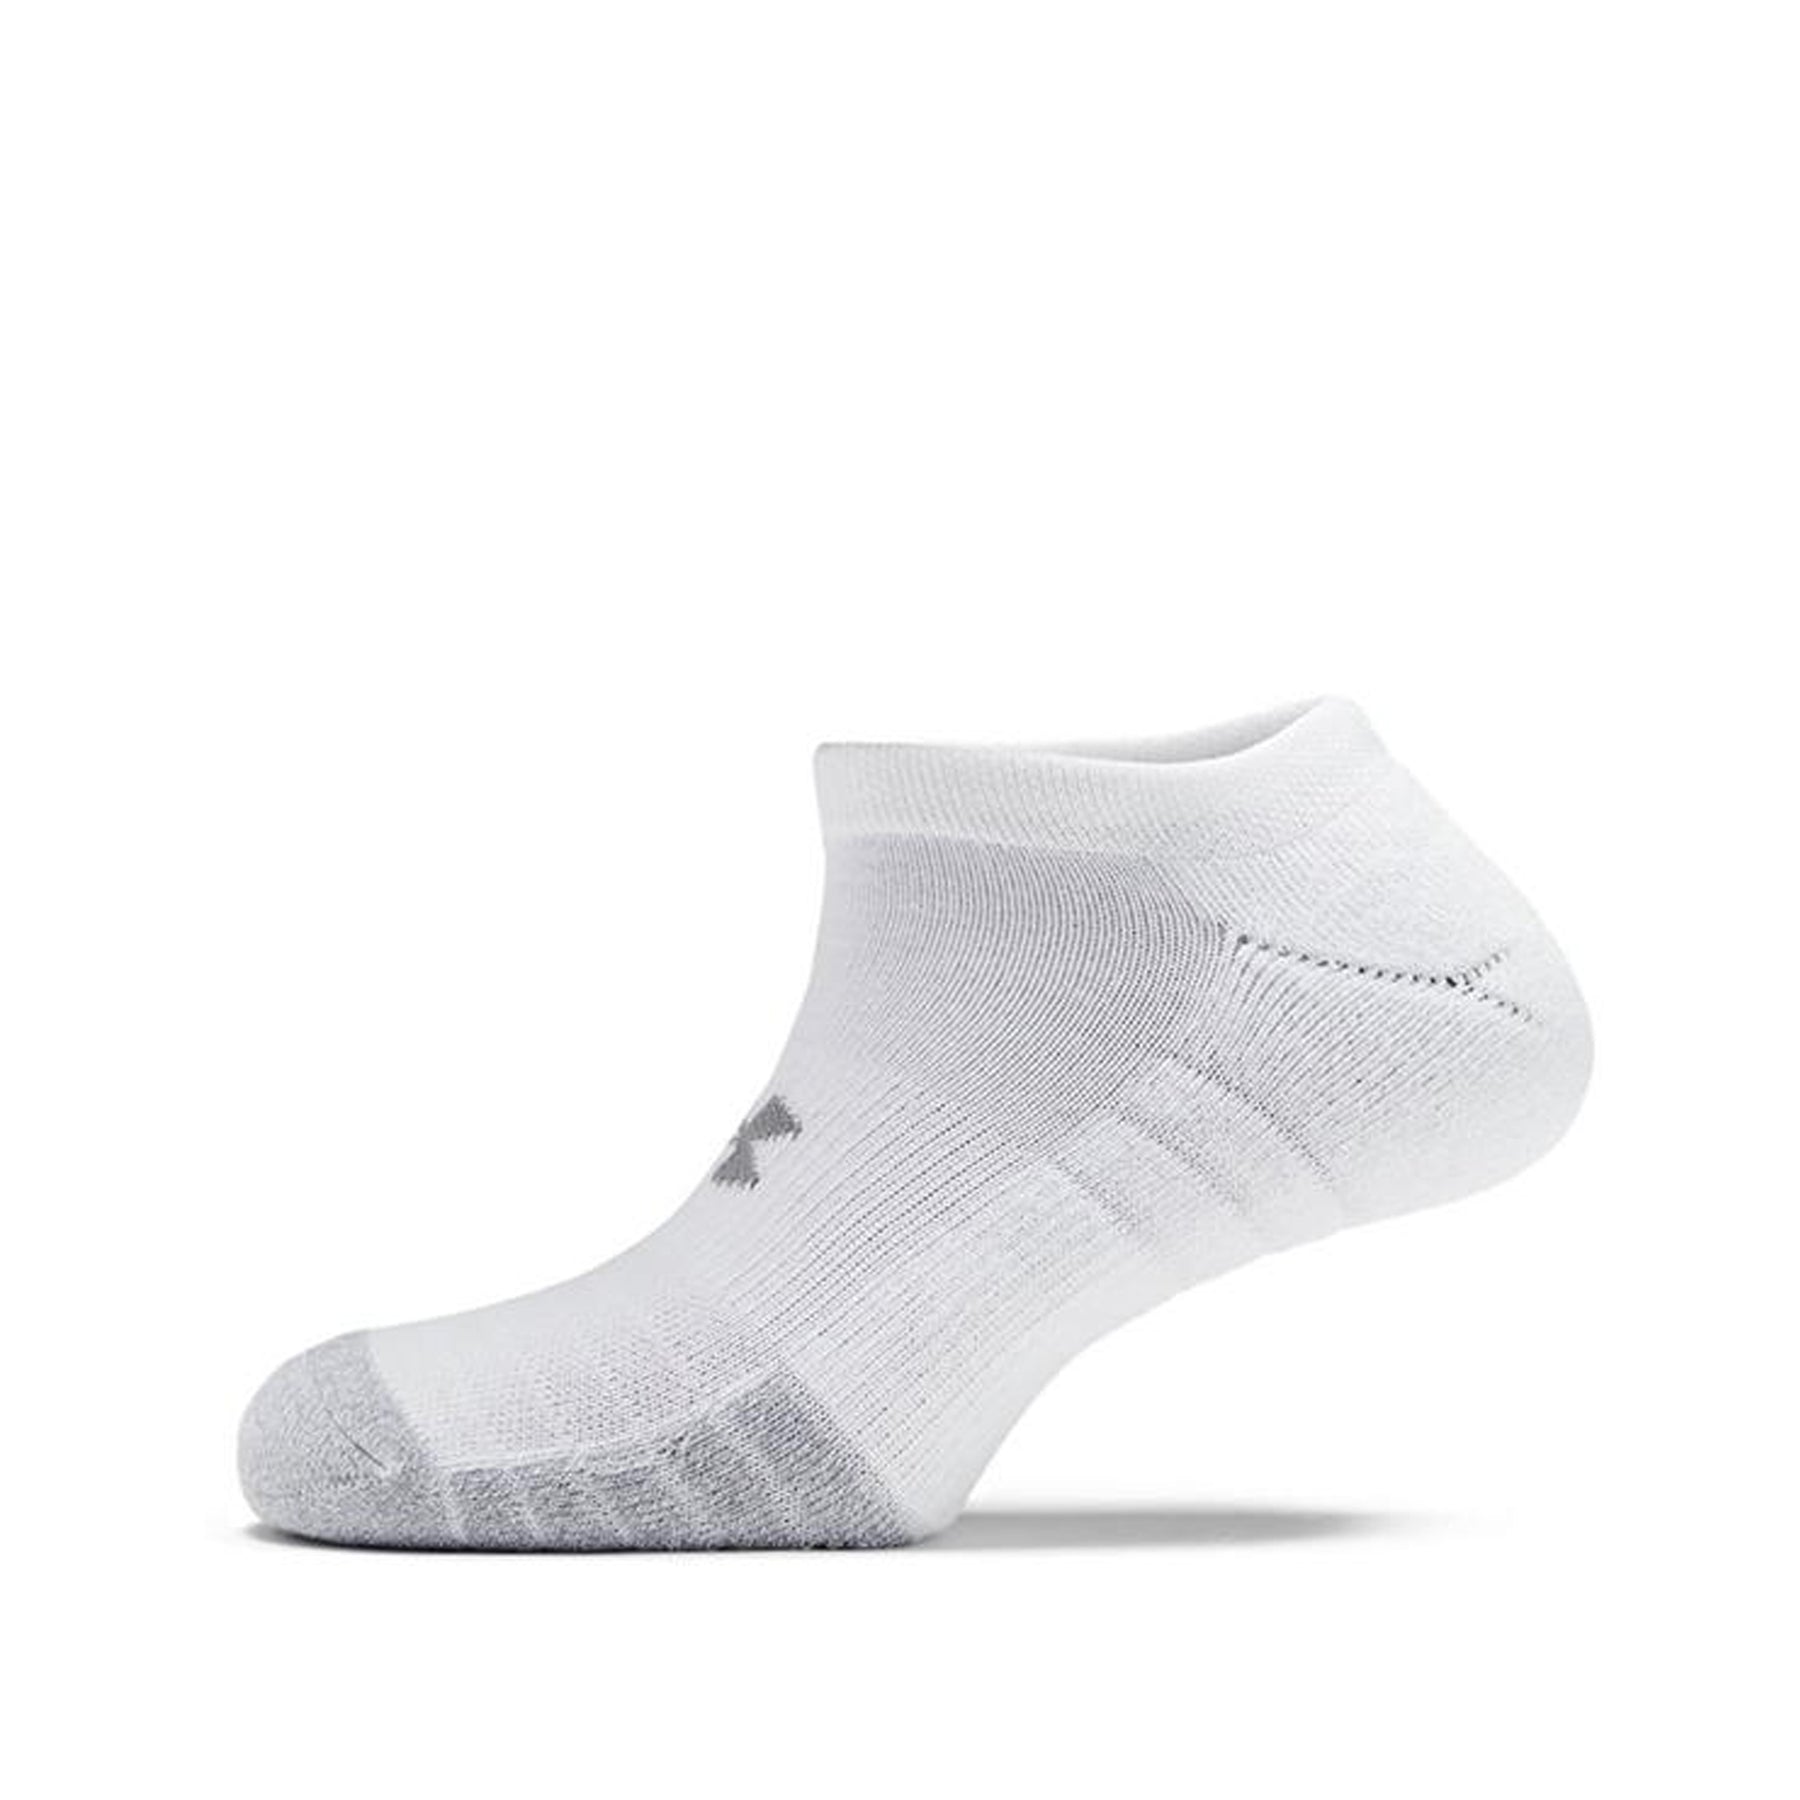 Under Armour No Show Socks 3 Pack: White